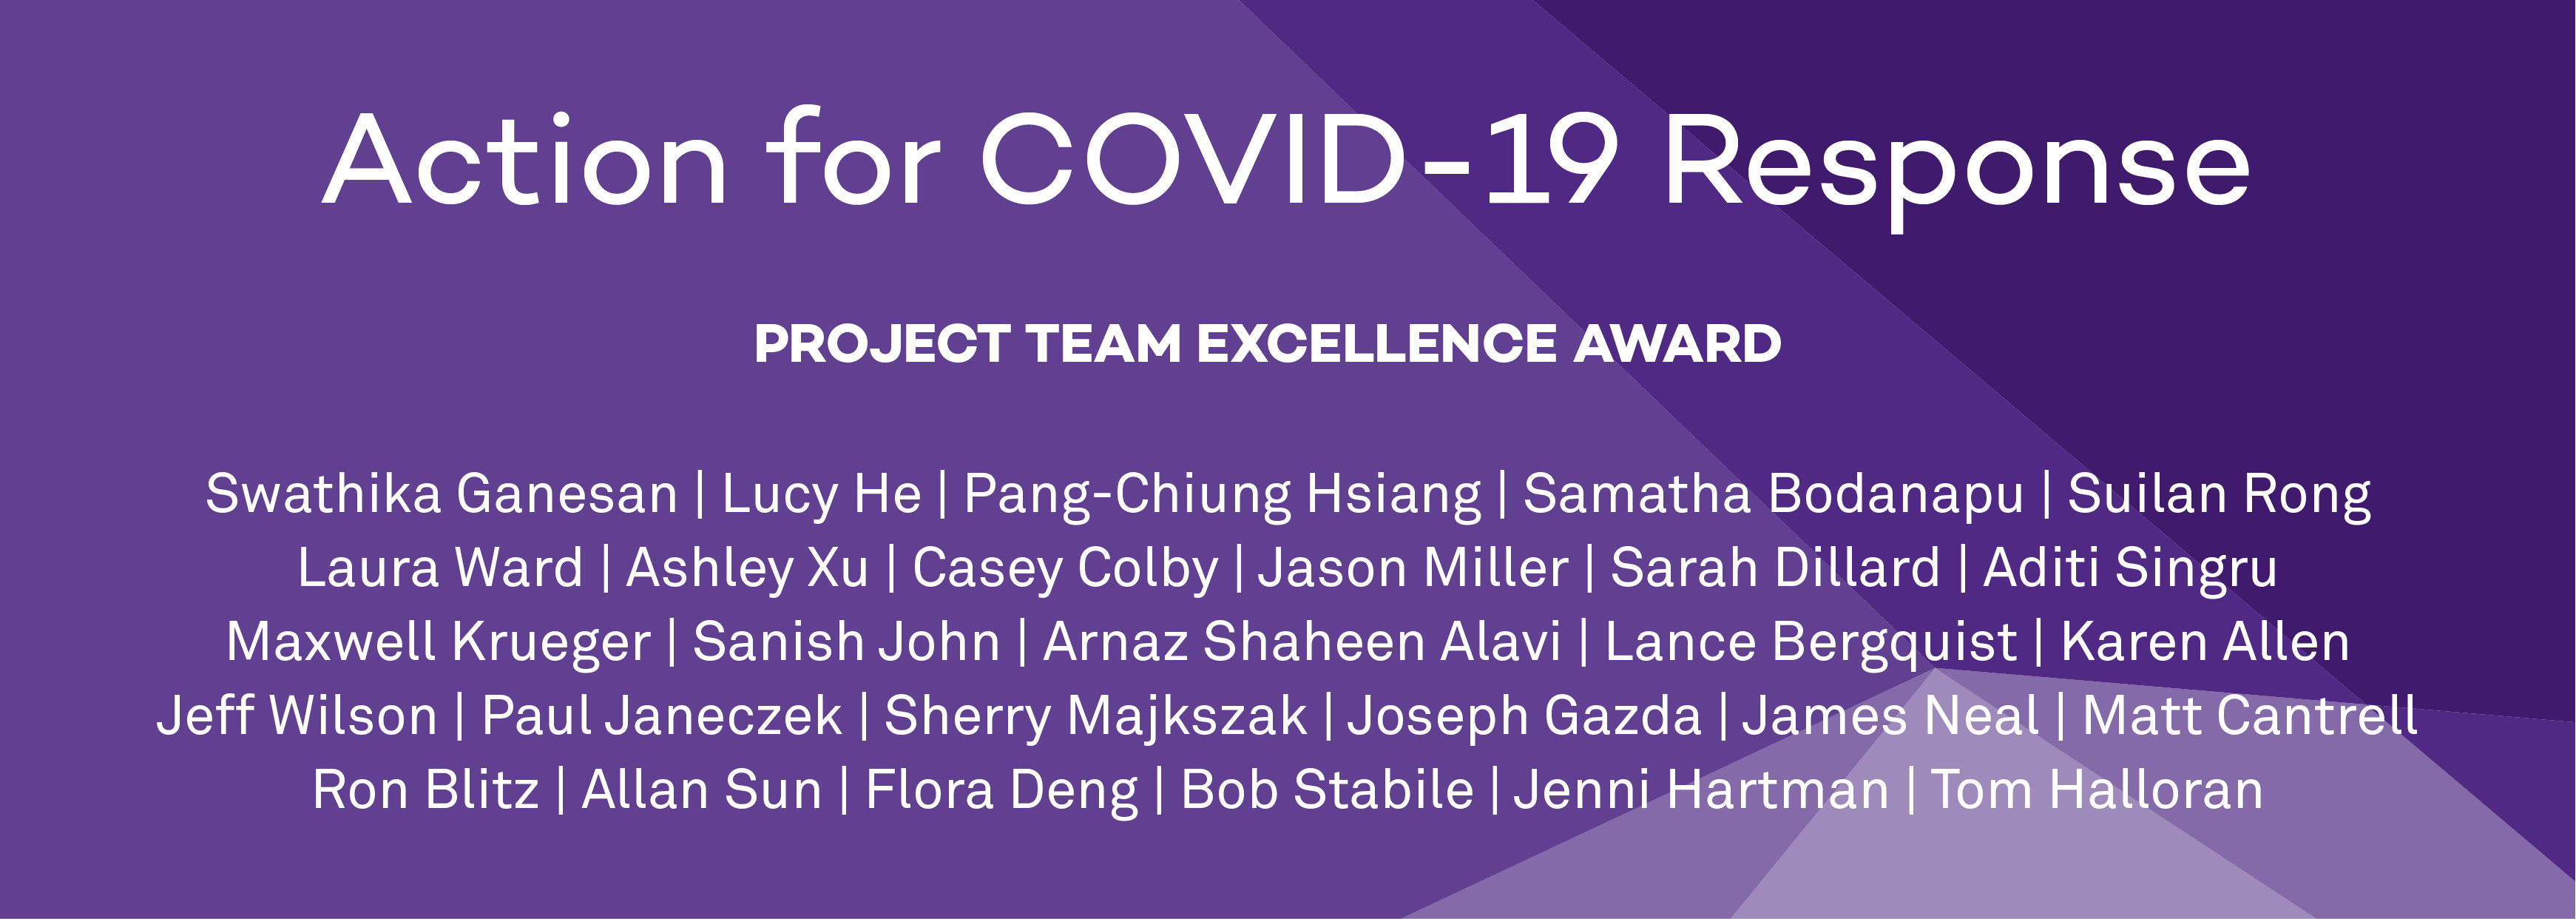 The Action for COVID-19 Response team winners